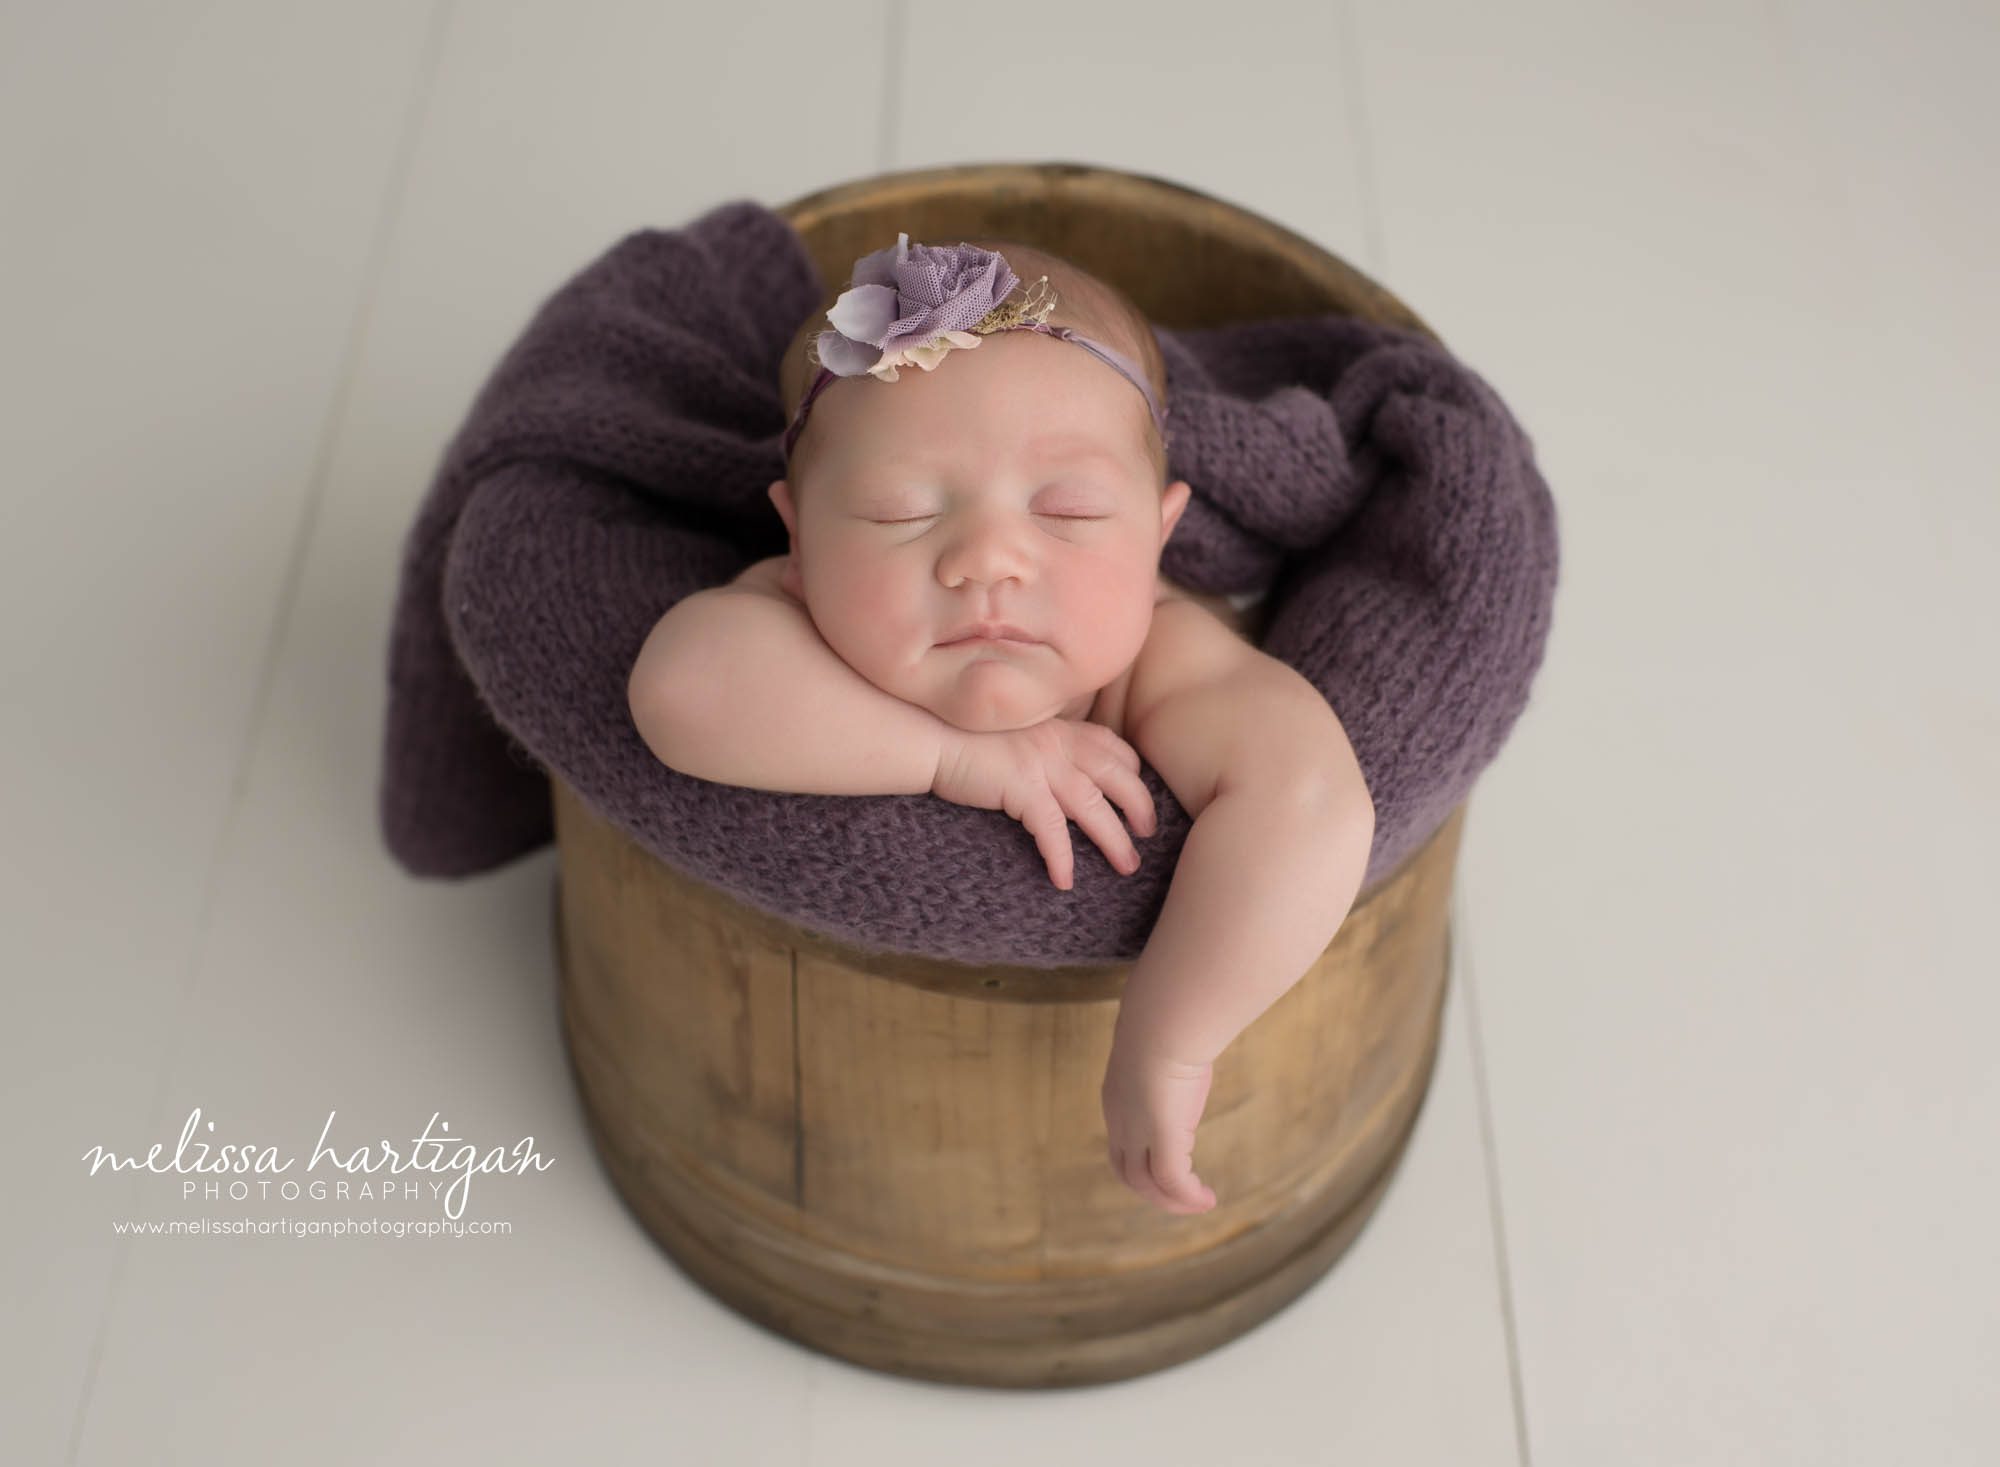 newborn baby girl posed in wooden bucket with purple layer wrap and flower headband